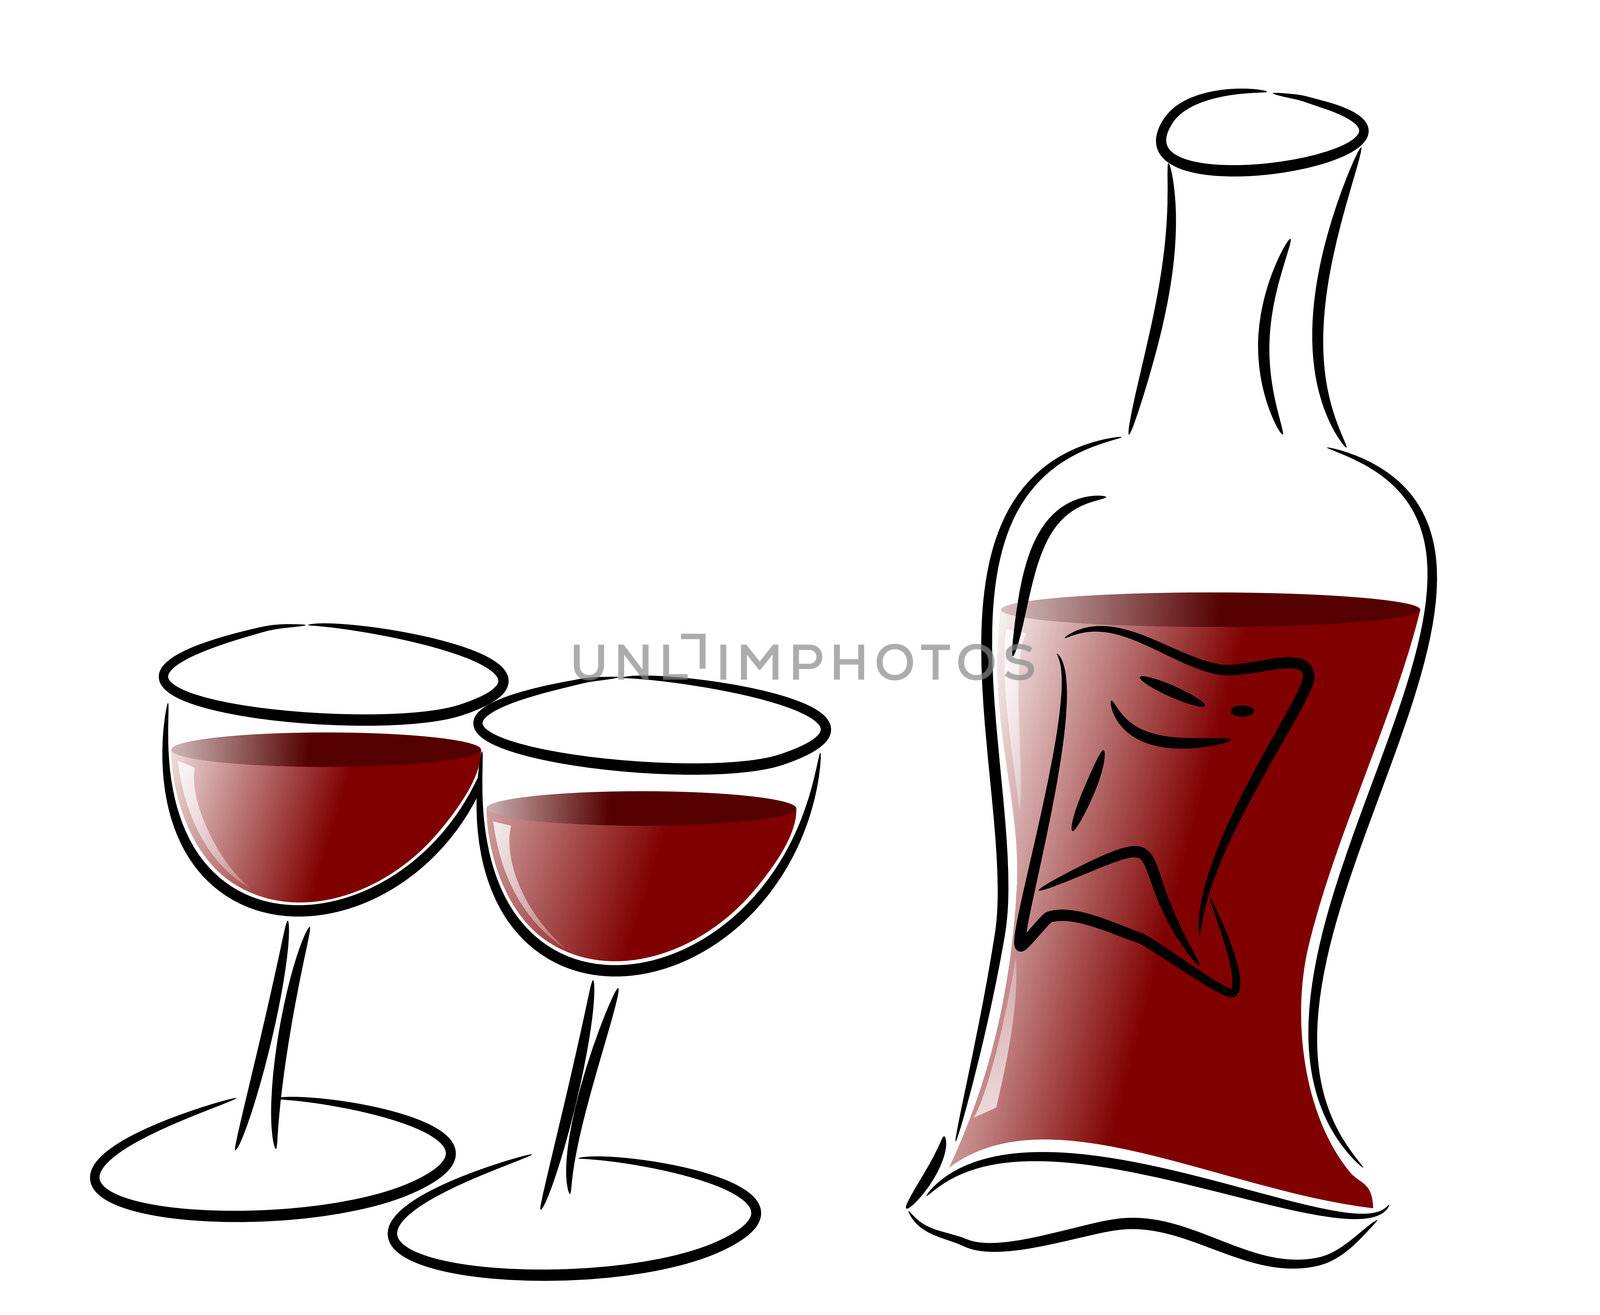 Free hand illustration of two wine glasses and a red wine bottle